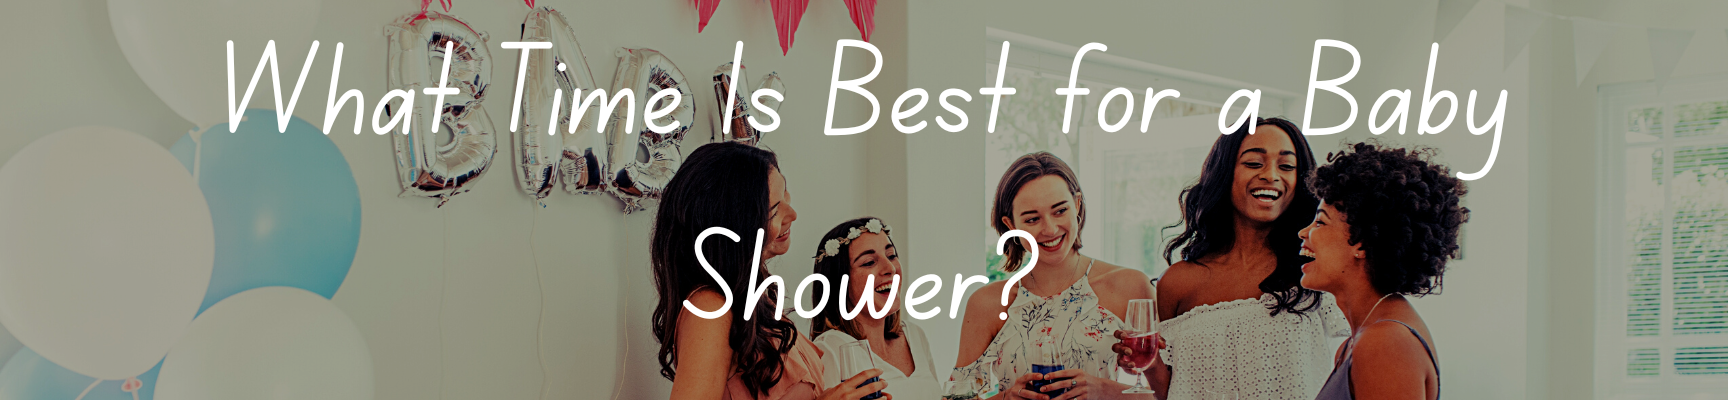 What Time Is Best for a Baby Shower?